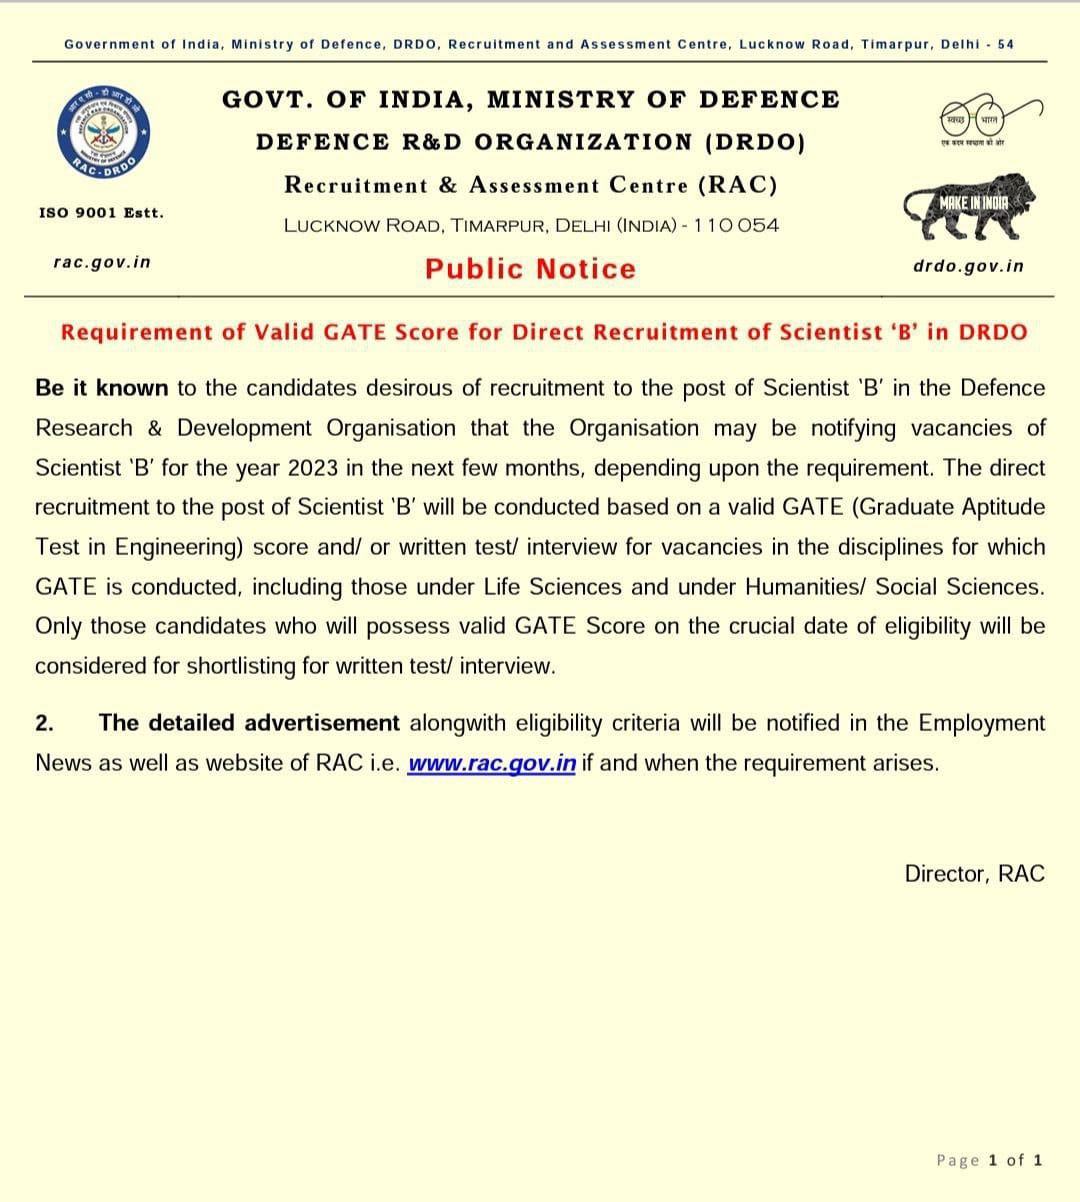 DRDO Recruitment 2022 Through GATE, Notified To Be Released Soon_4.1